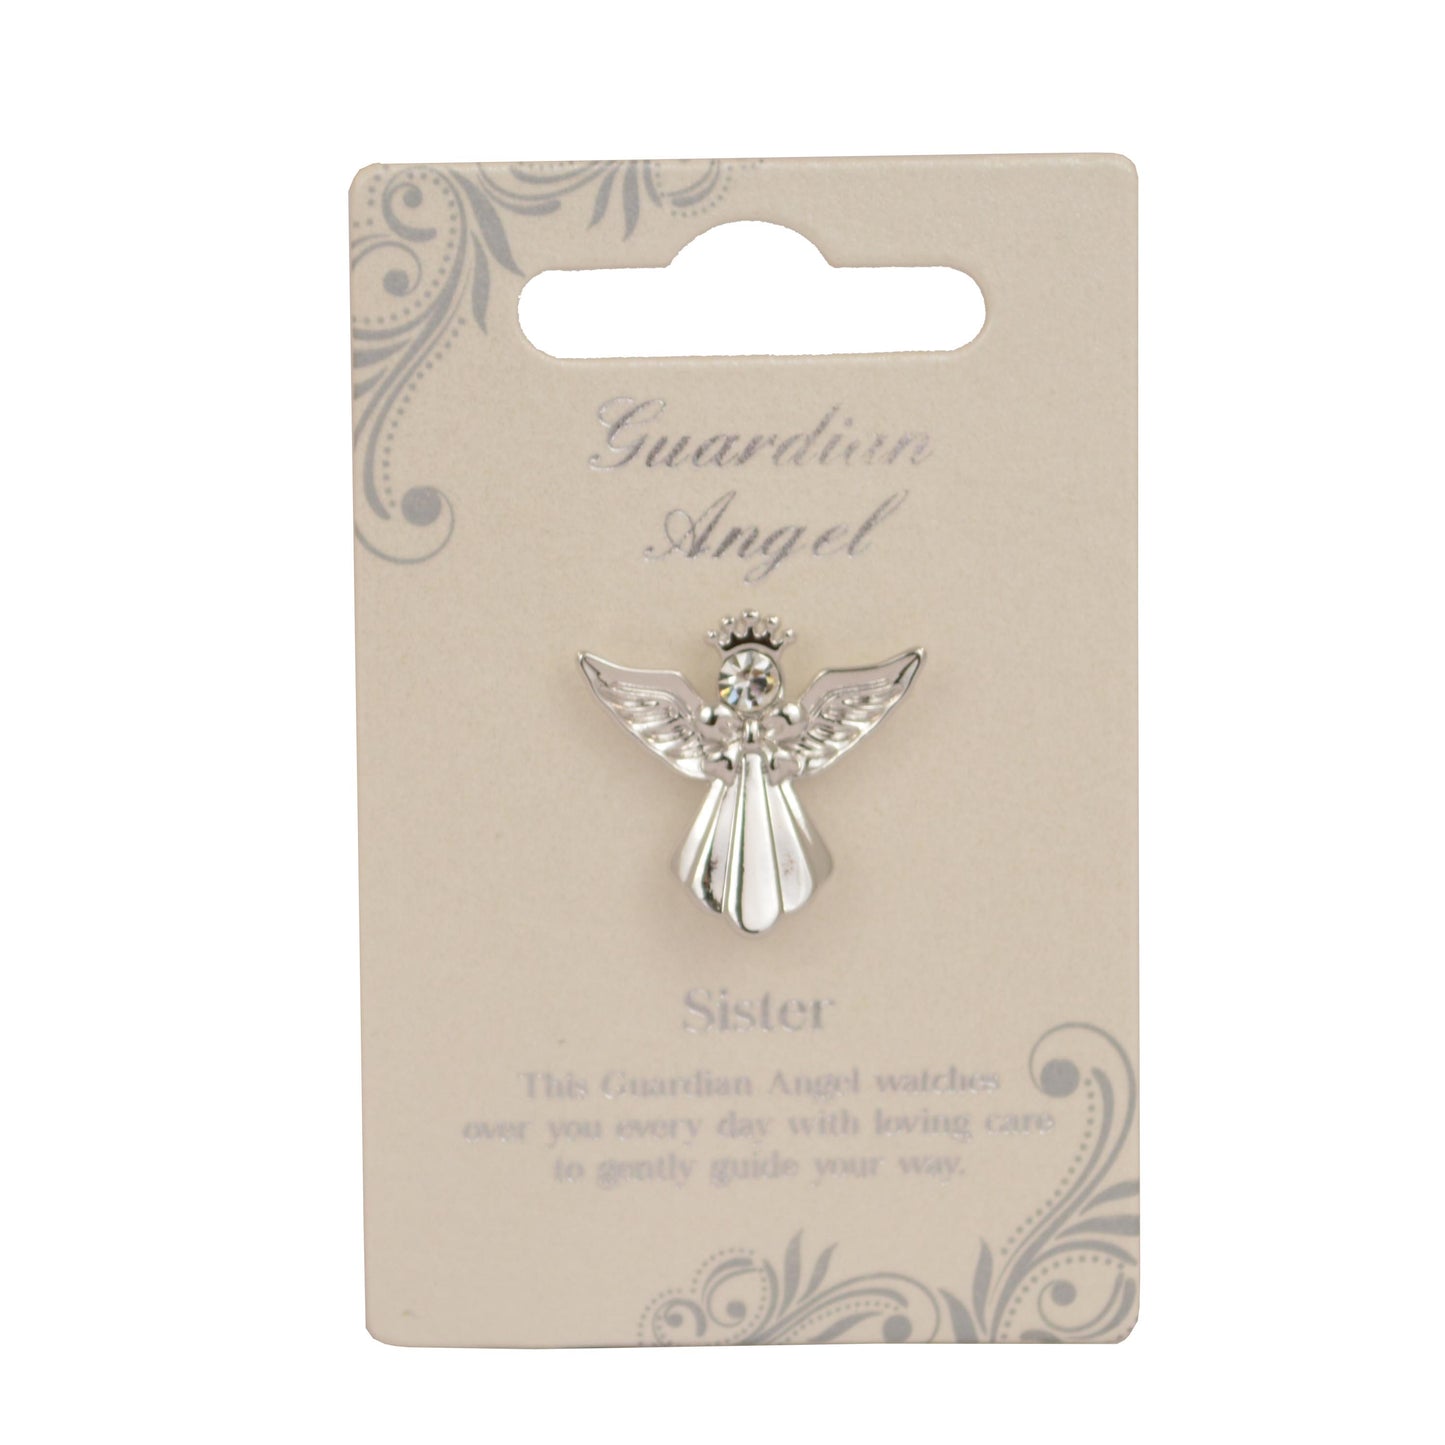 Sister Guardian Angel Silver Coloured Angel Pin With Gem Stone